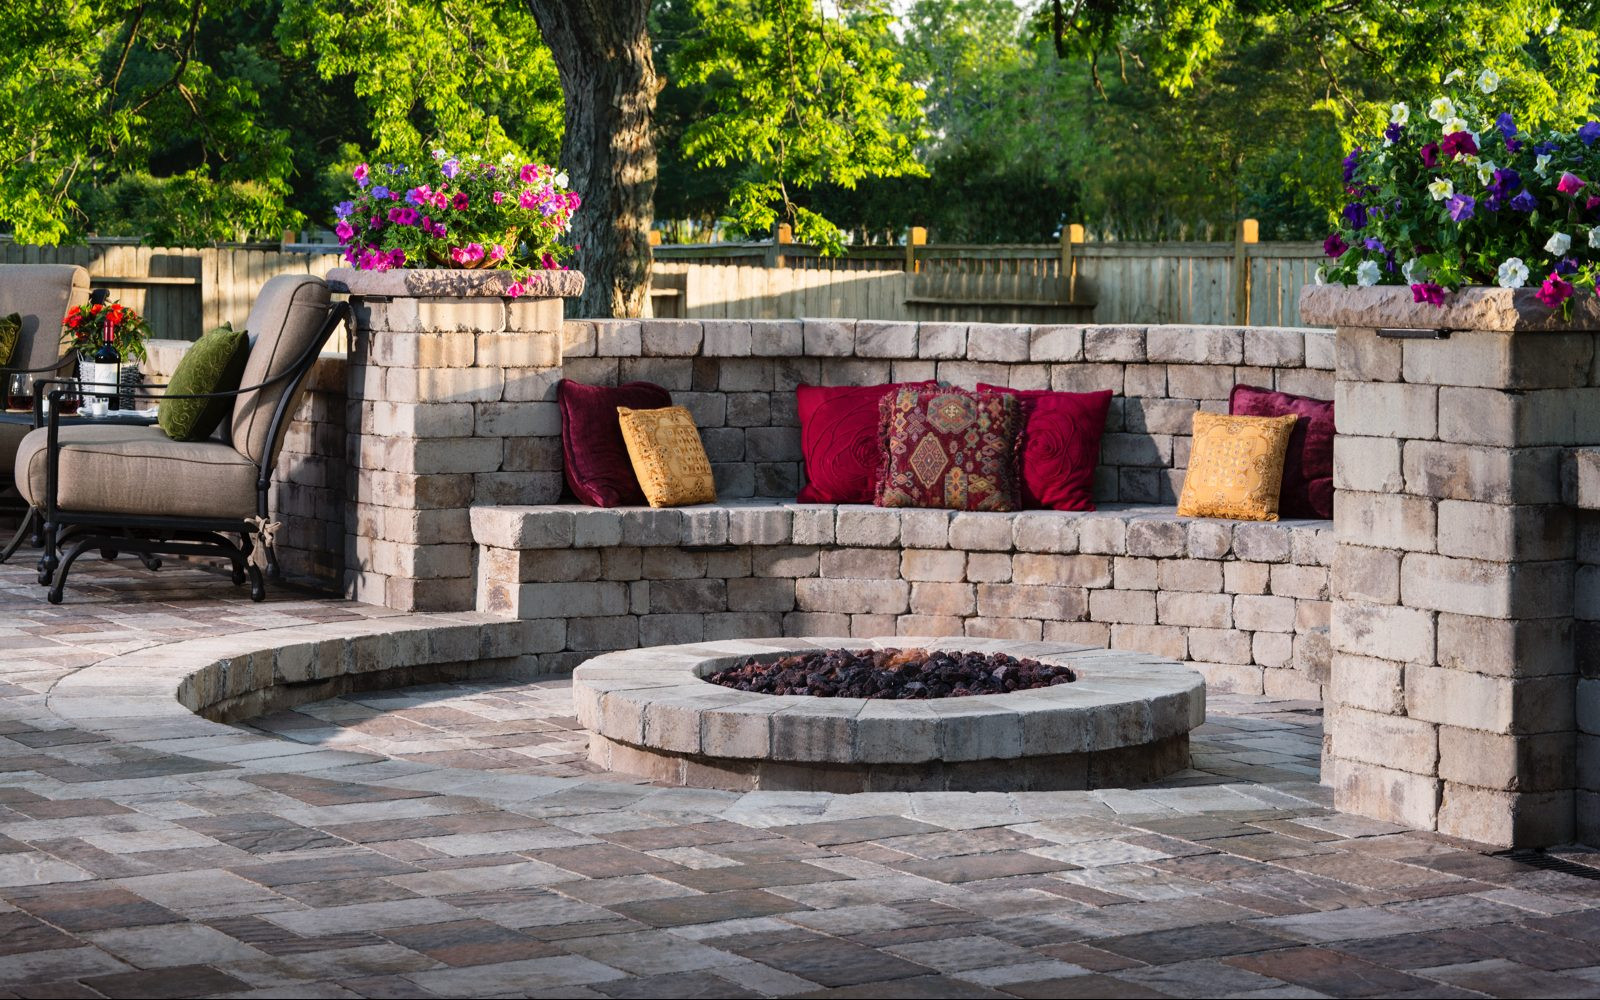 Rock Patio With Fire Pit
 Turn Up the Heat with These Cozy Fire Pit Patio Design